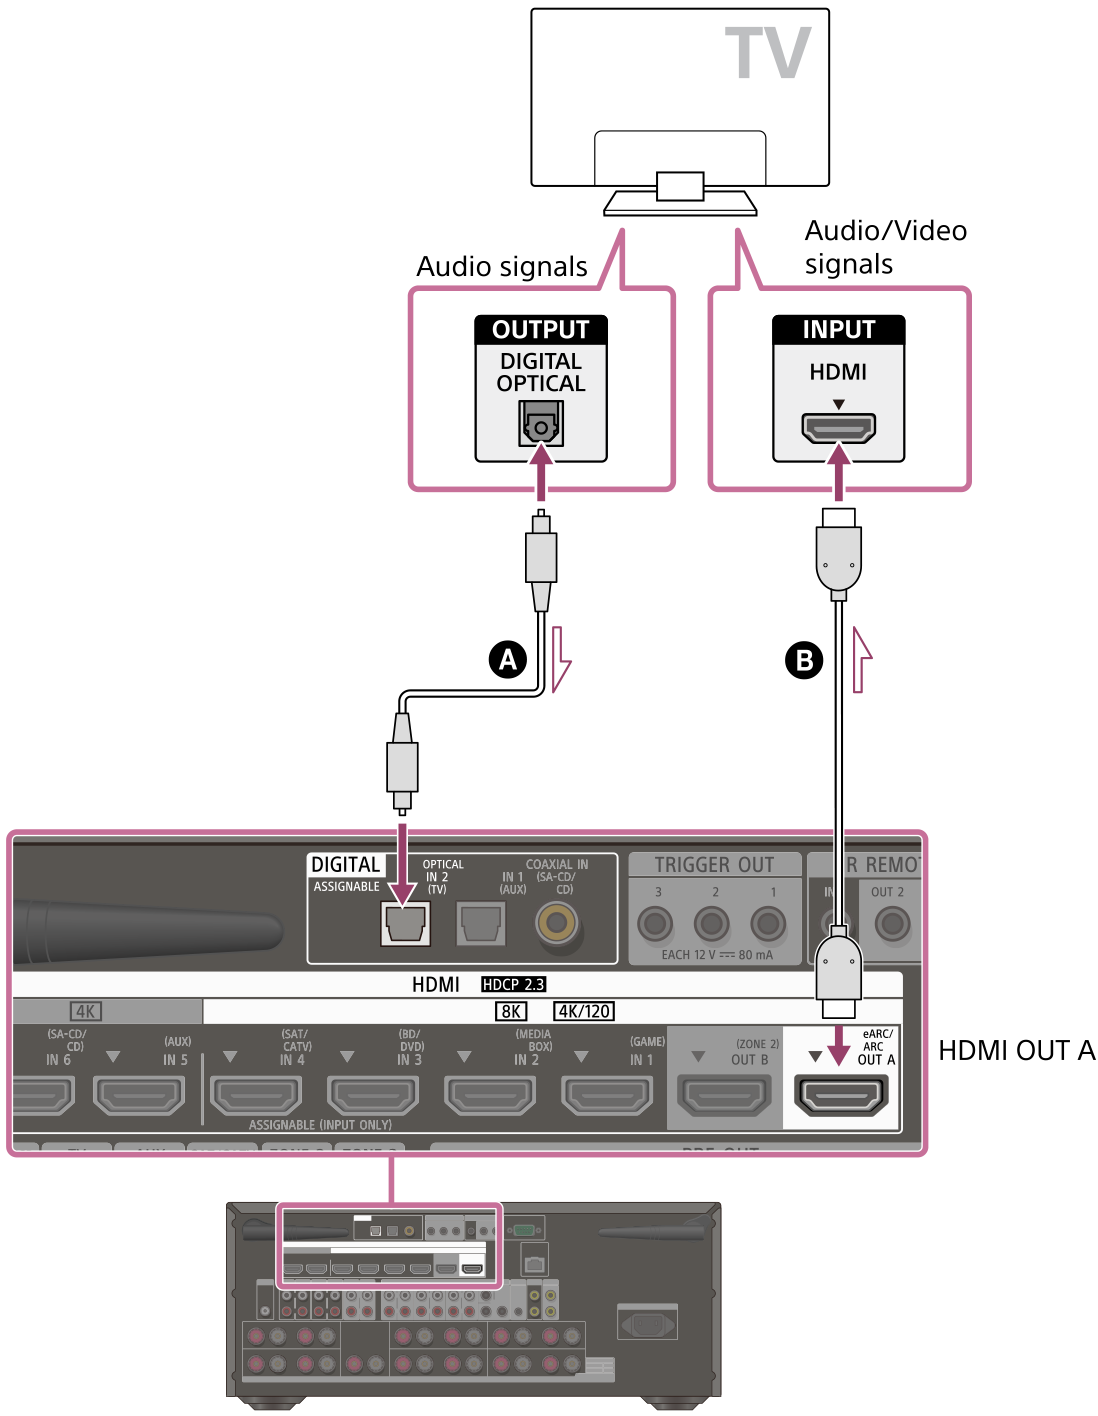 Illustration of connecting the TV and receiver. Connect the HDMI OUT A jack on the rear of the receiver with the HDMI INPUT jack on your TV using an HDMI cable (not supplied). Connect the DIGITAL OPTICAL IN 2 (TV) jack on the rear of the receiver with the DIGITAL OPTICAL OUTPUT jack on the rear of your TV using an optical digital cable (not supplied).